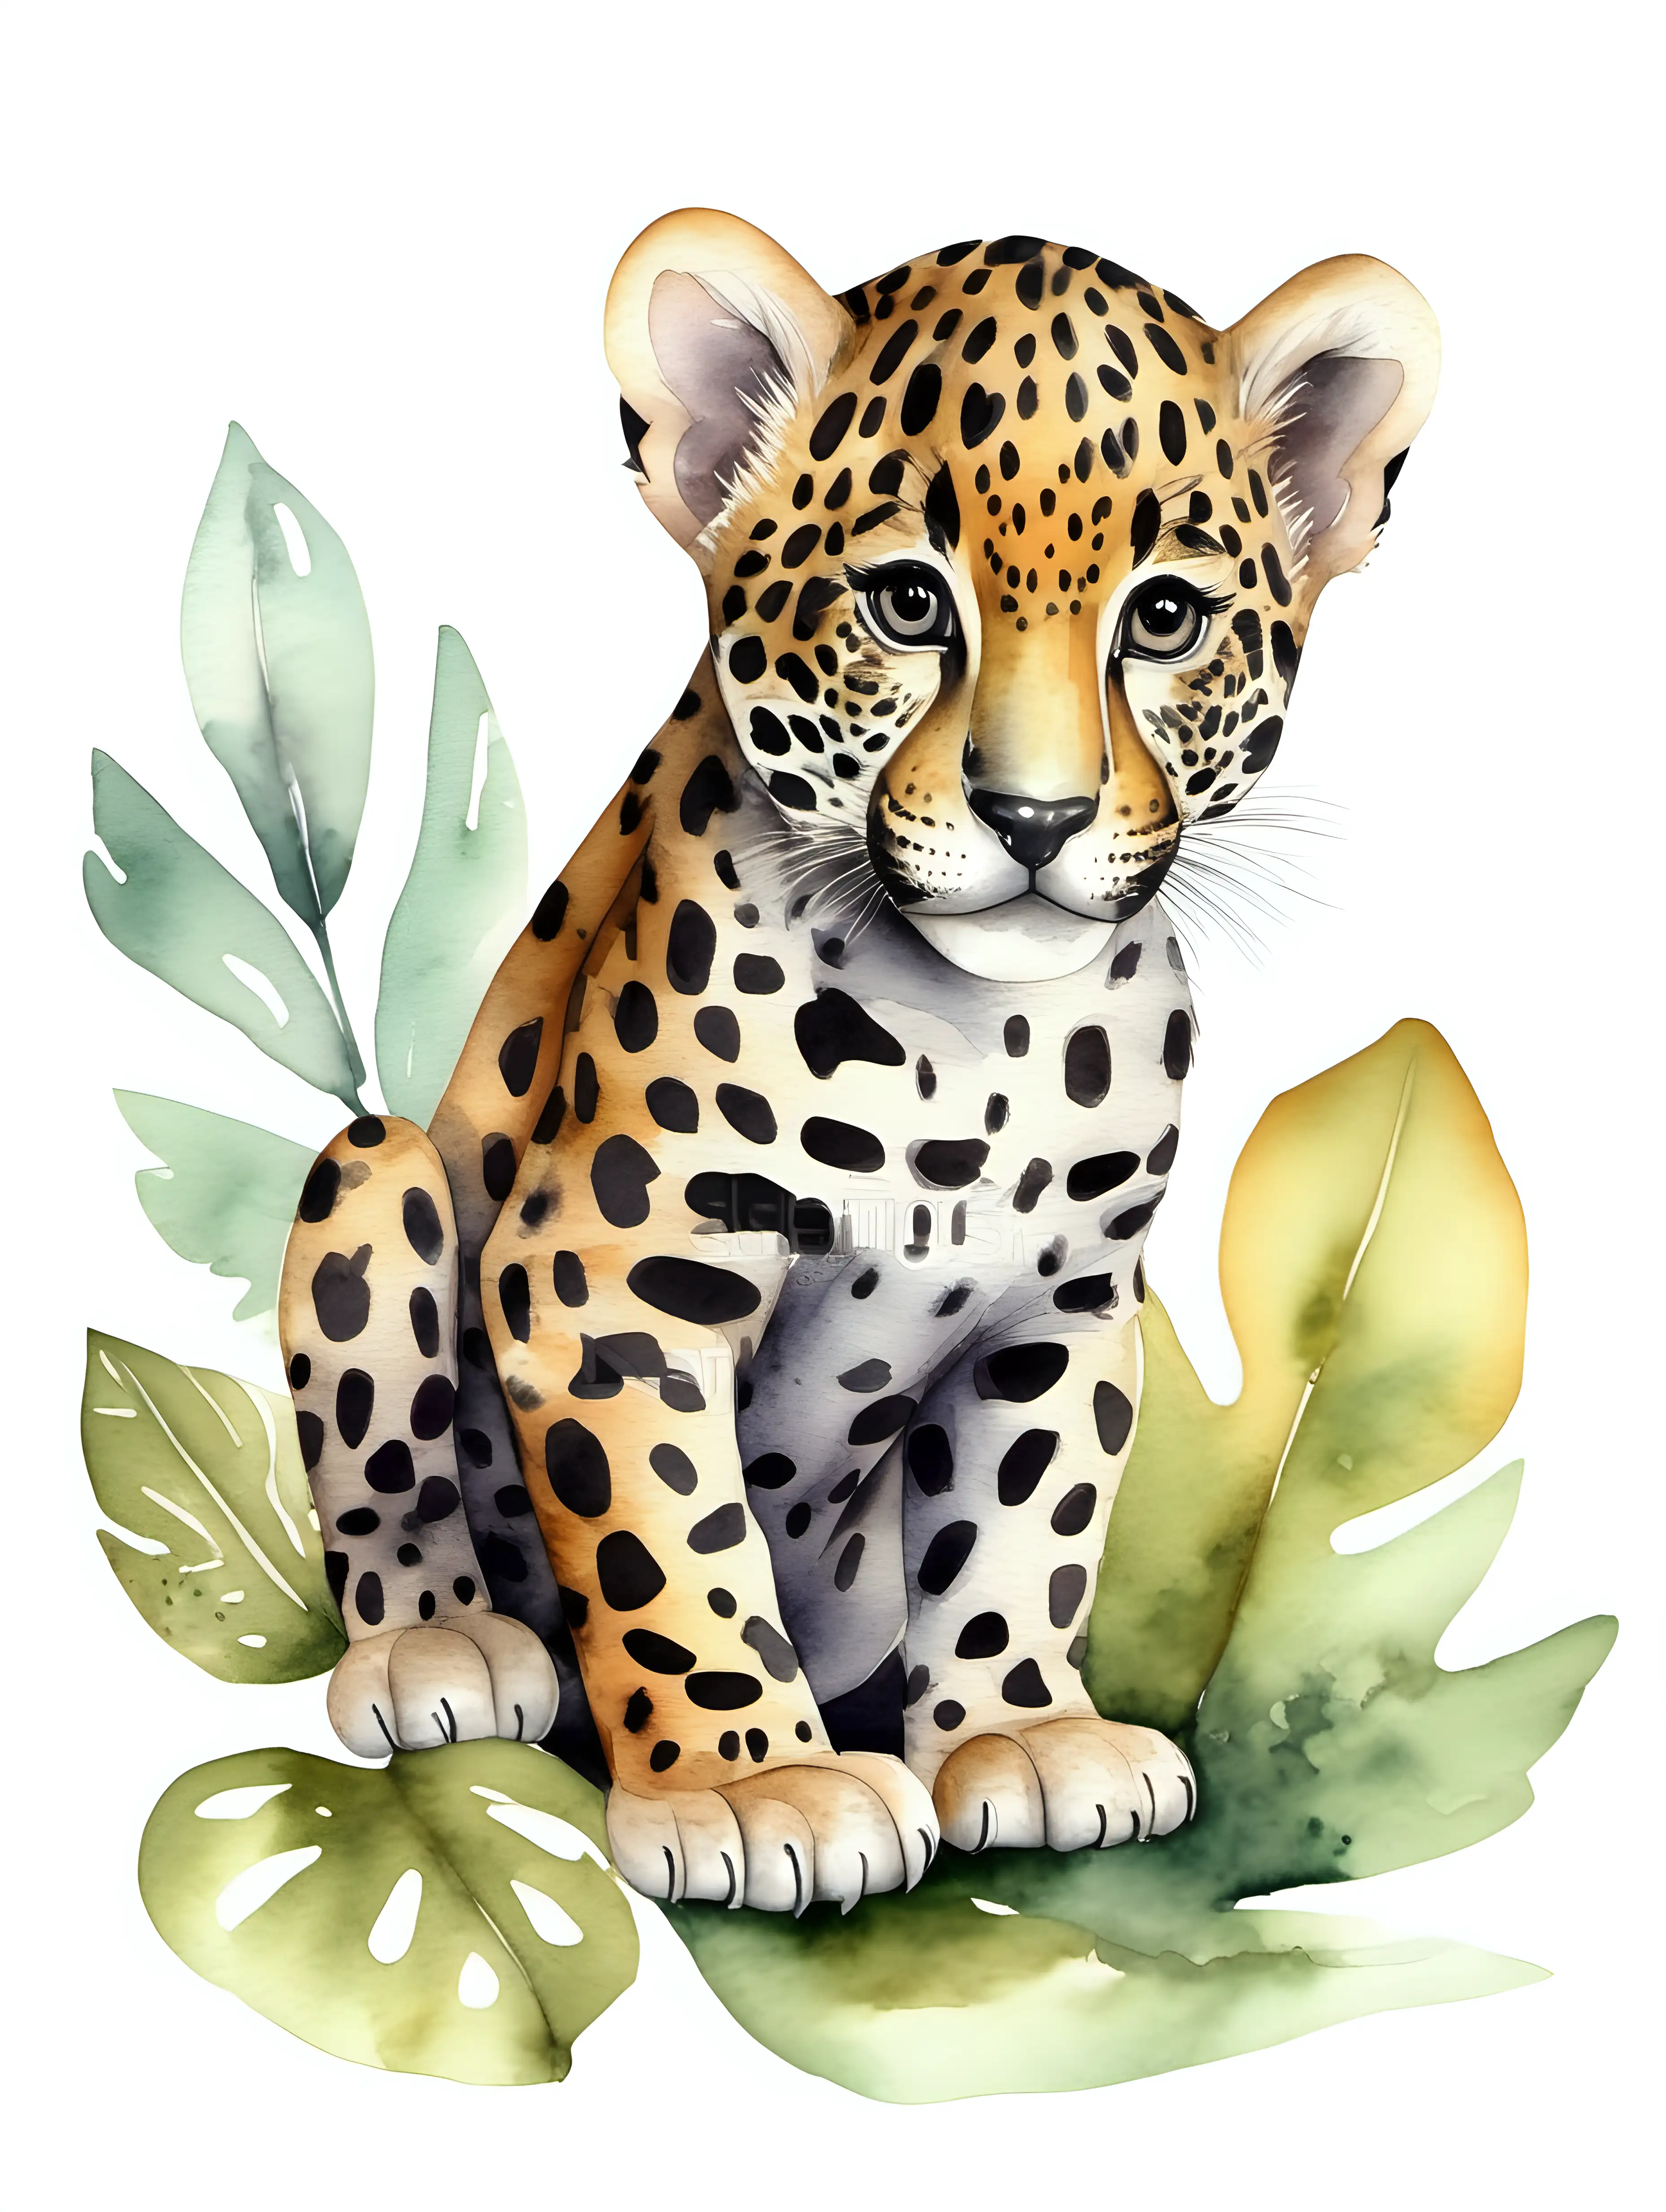 Adorable Baby Jaguar Watercolor Illustration in Enchanting Woodland Style